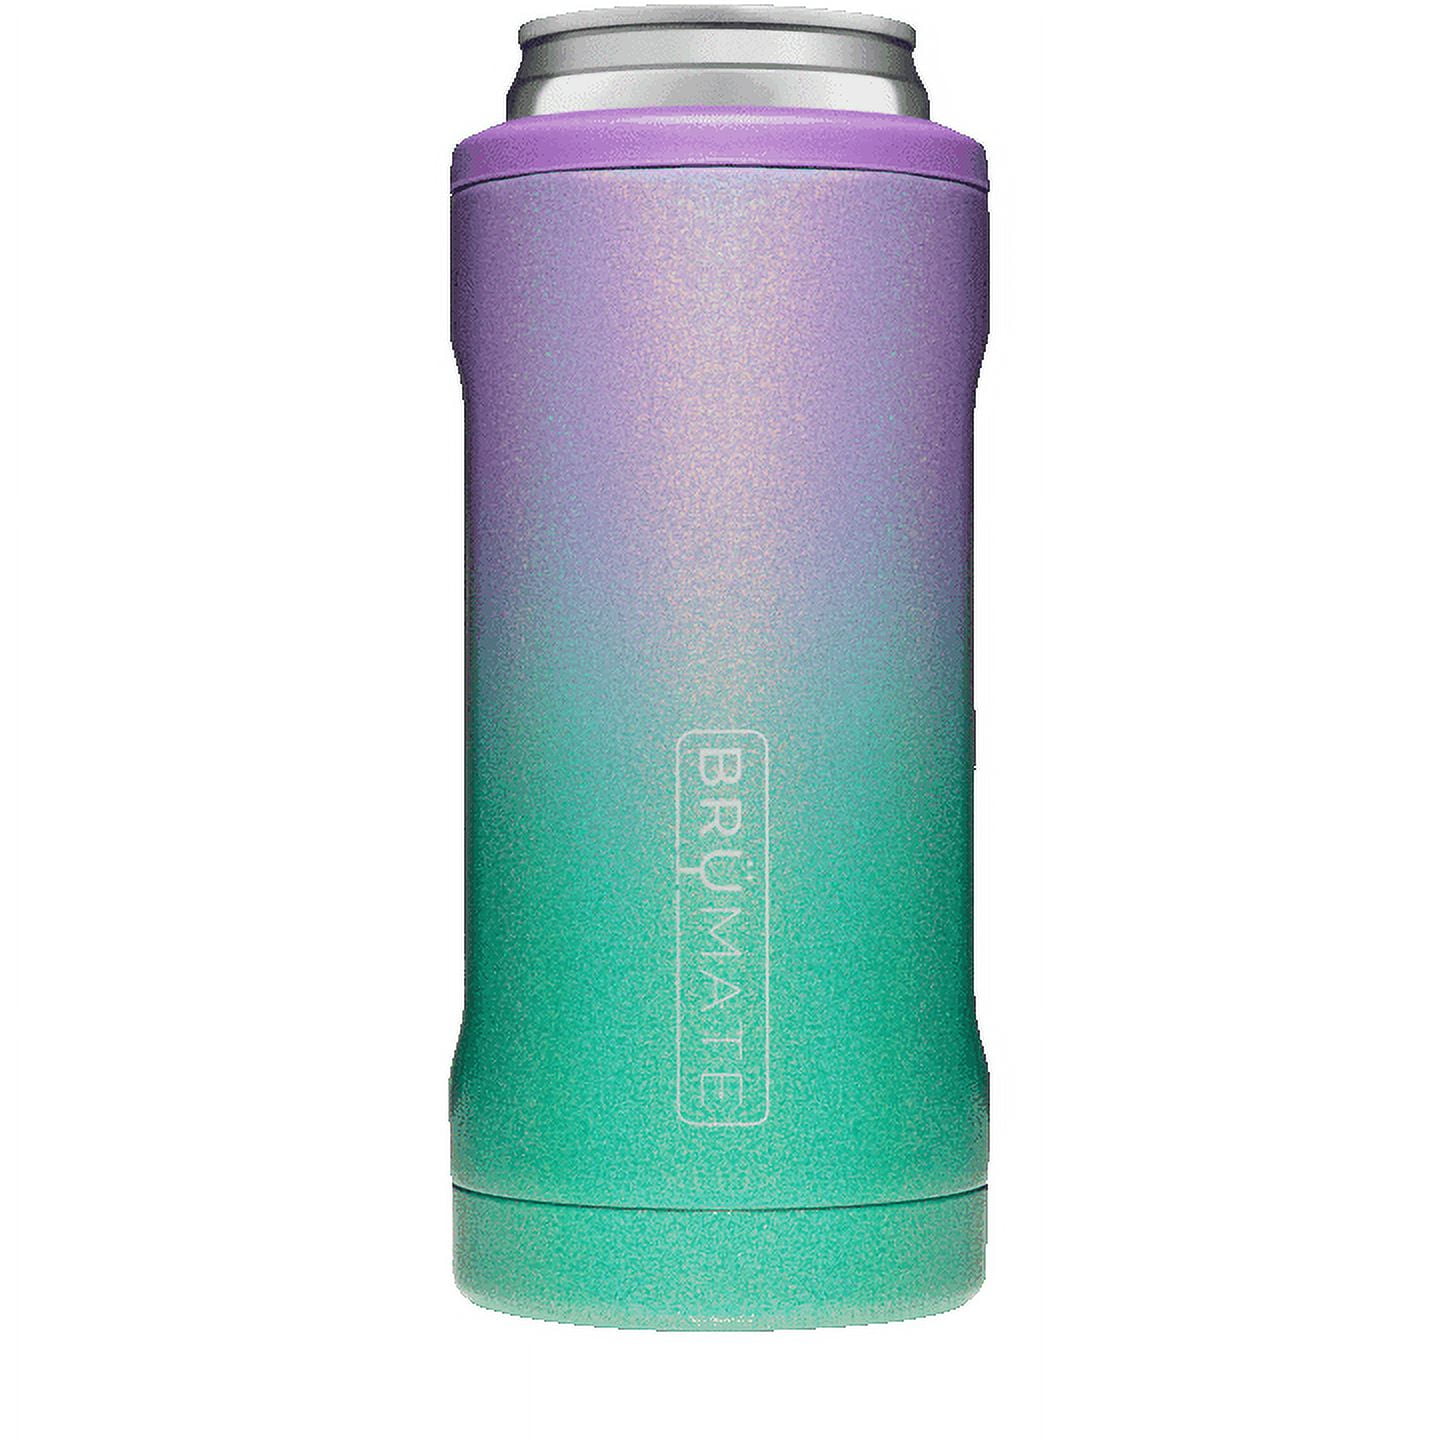  BrüMate Hopsulator Slim Can Cooler Insulated for 12oz Slim Cans   Skinny Can Insulated Stainless Steel Drink Holder for Hard Seltzer, Beer,  Soda, and Energy Drinks (Matte Black) : Health 